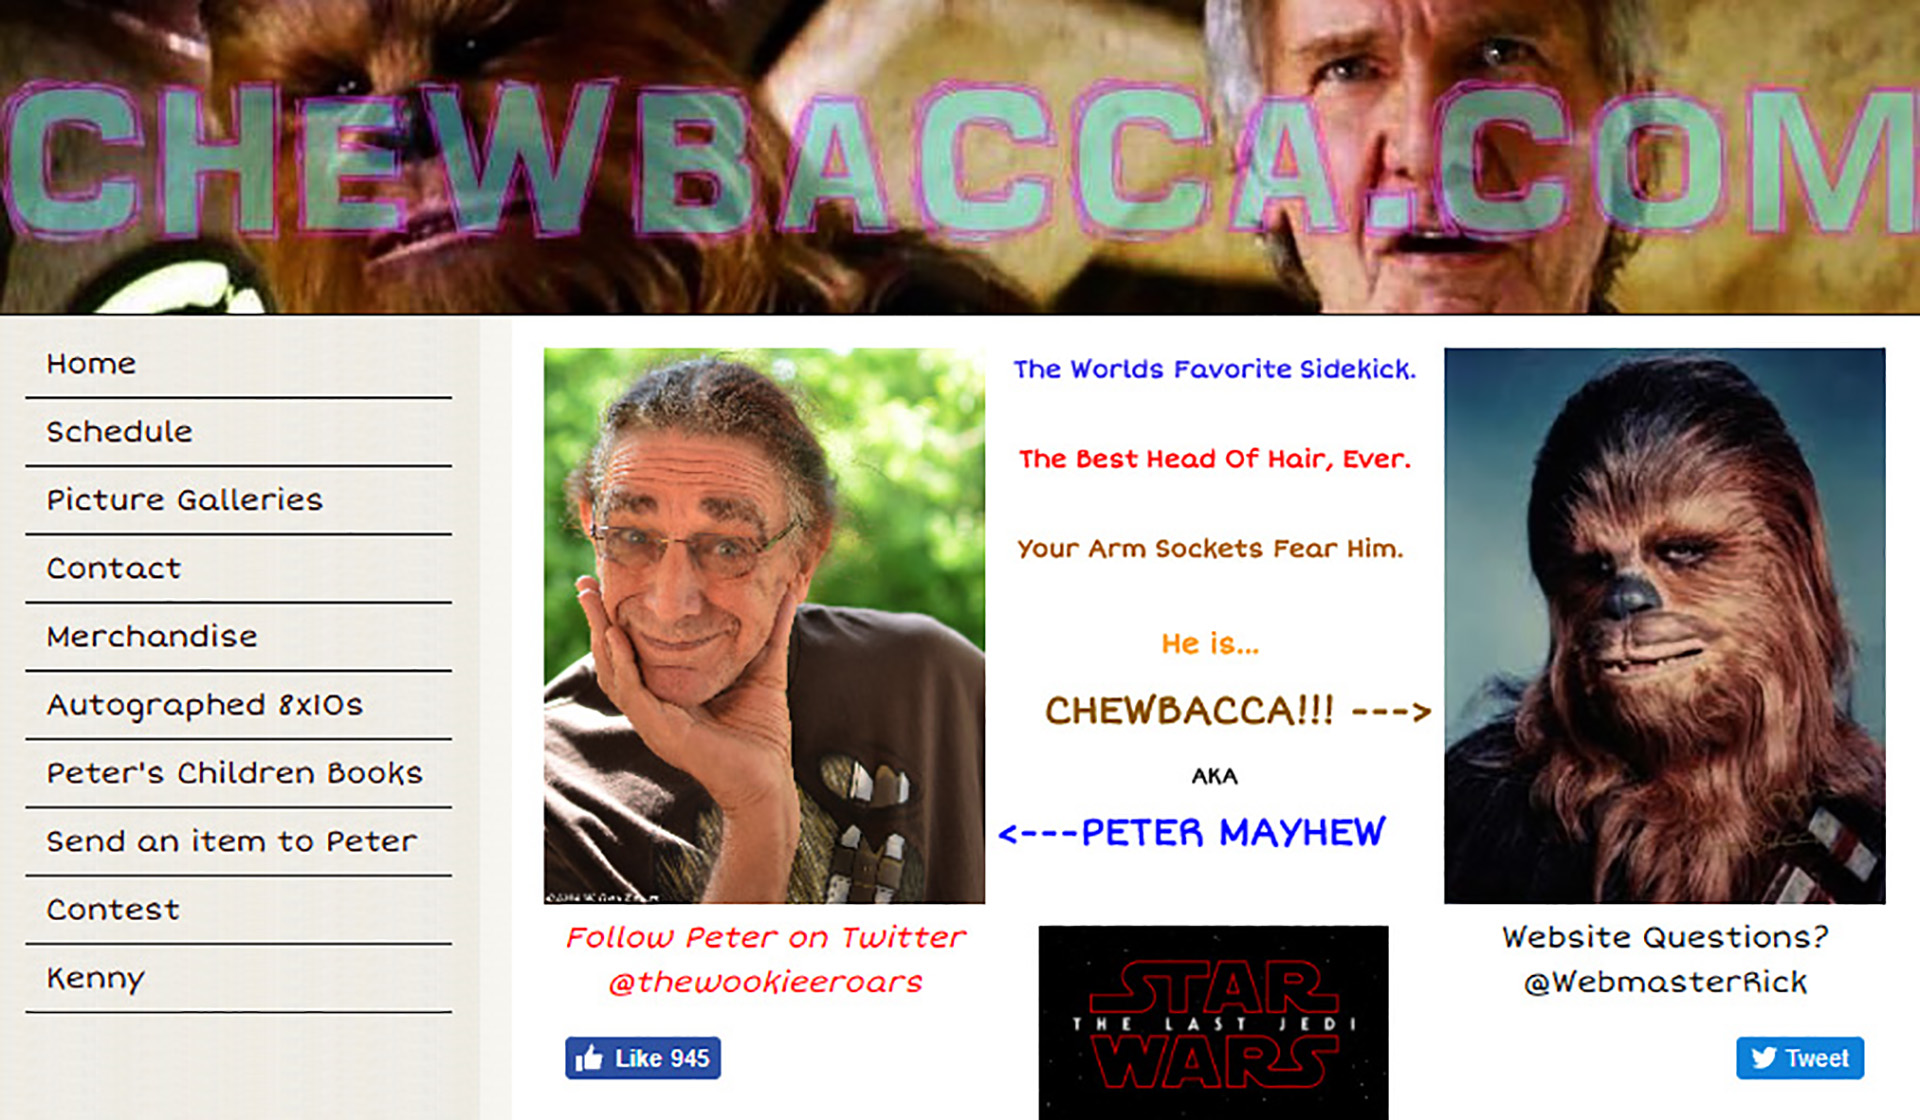 screen capture of the home page of the website chewbacca.com